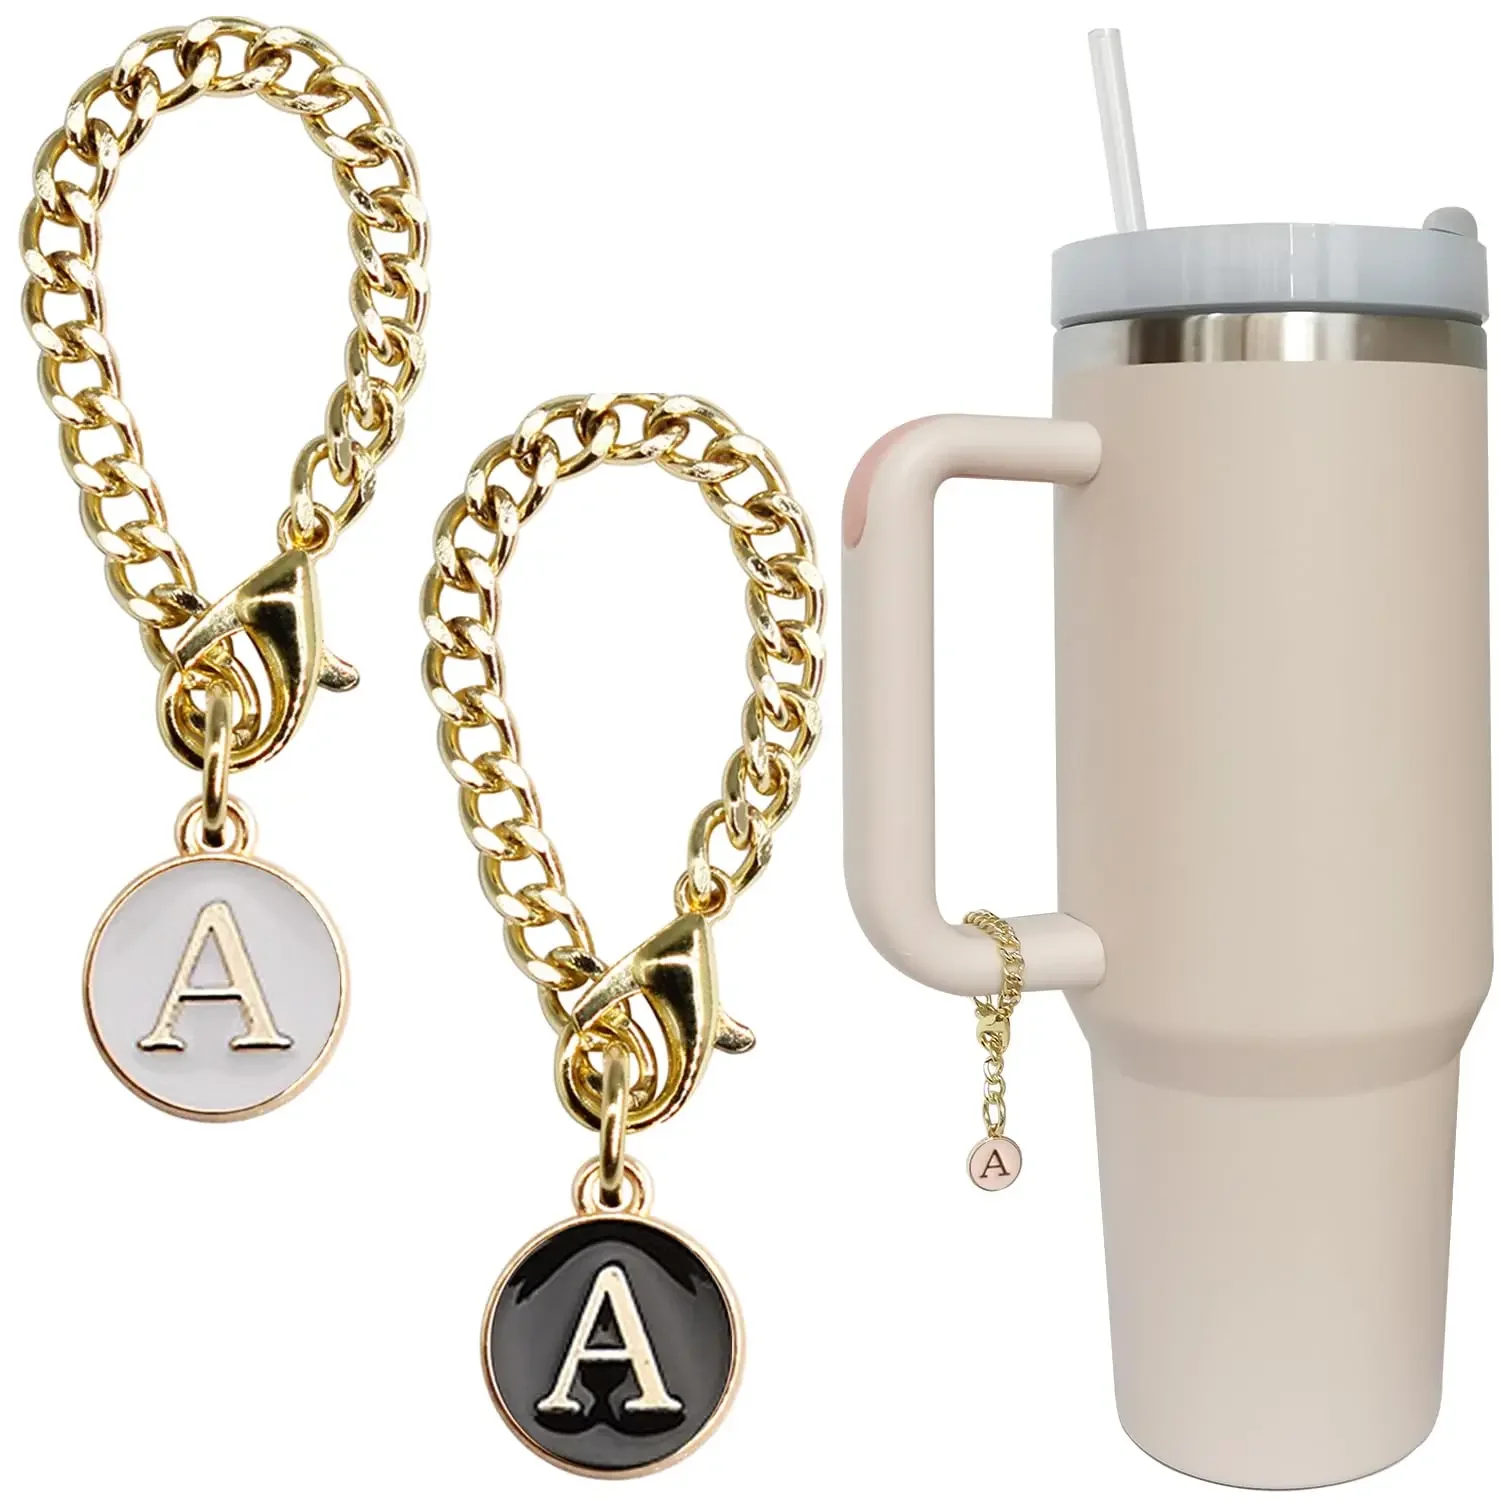 https://ae01.alicdn.com/kf/S88276011f3244621ab090049133a391ds/Letter-Charm-Accessories-for-Stanley-Cup-2PCS-Initial-Name-ID-Personalized-Handle-Charm-for-Stanley-Tumbler.jpg